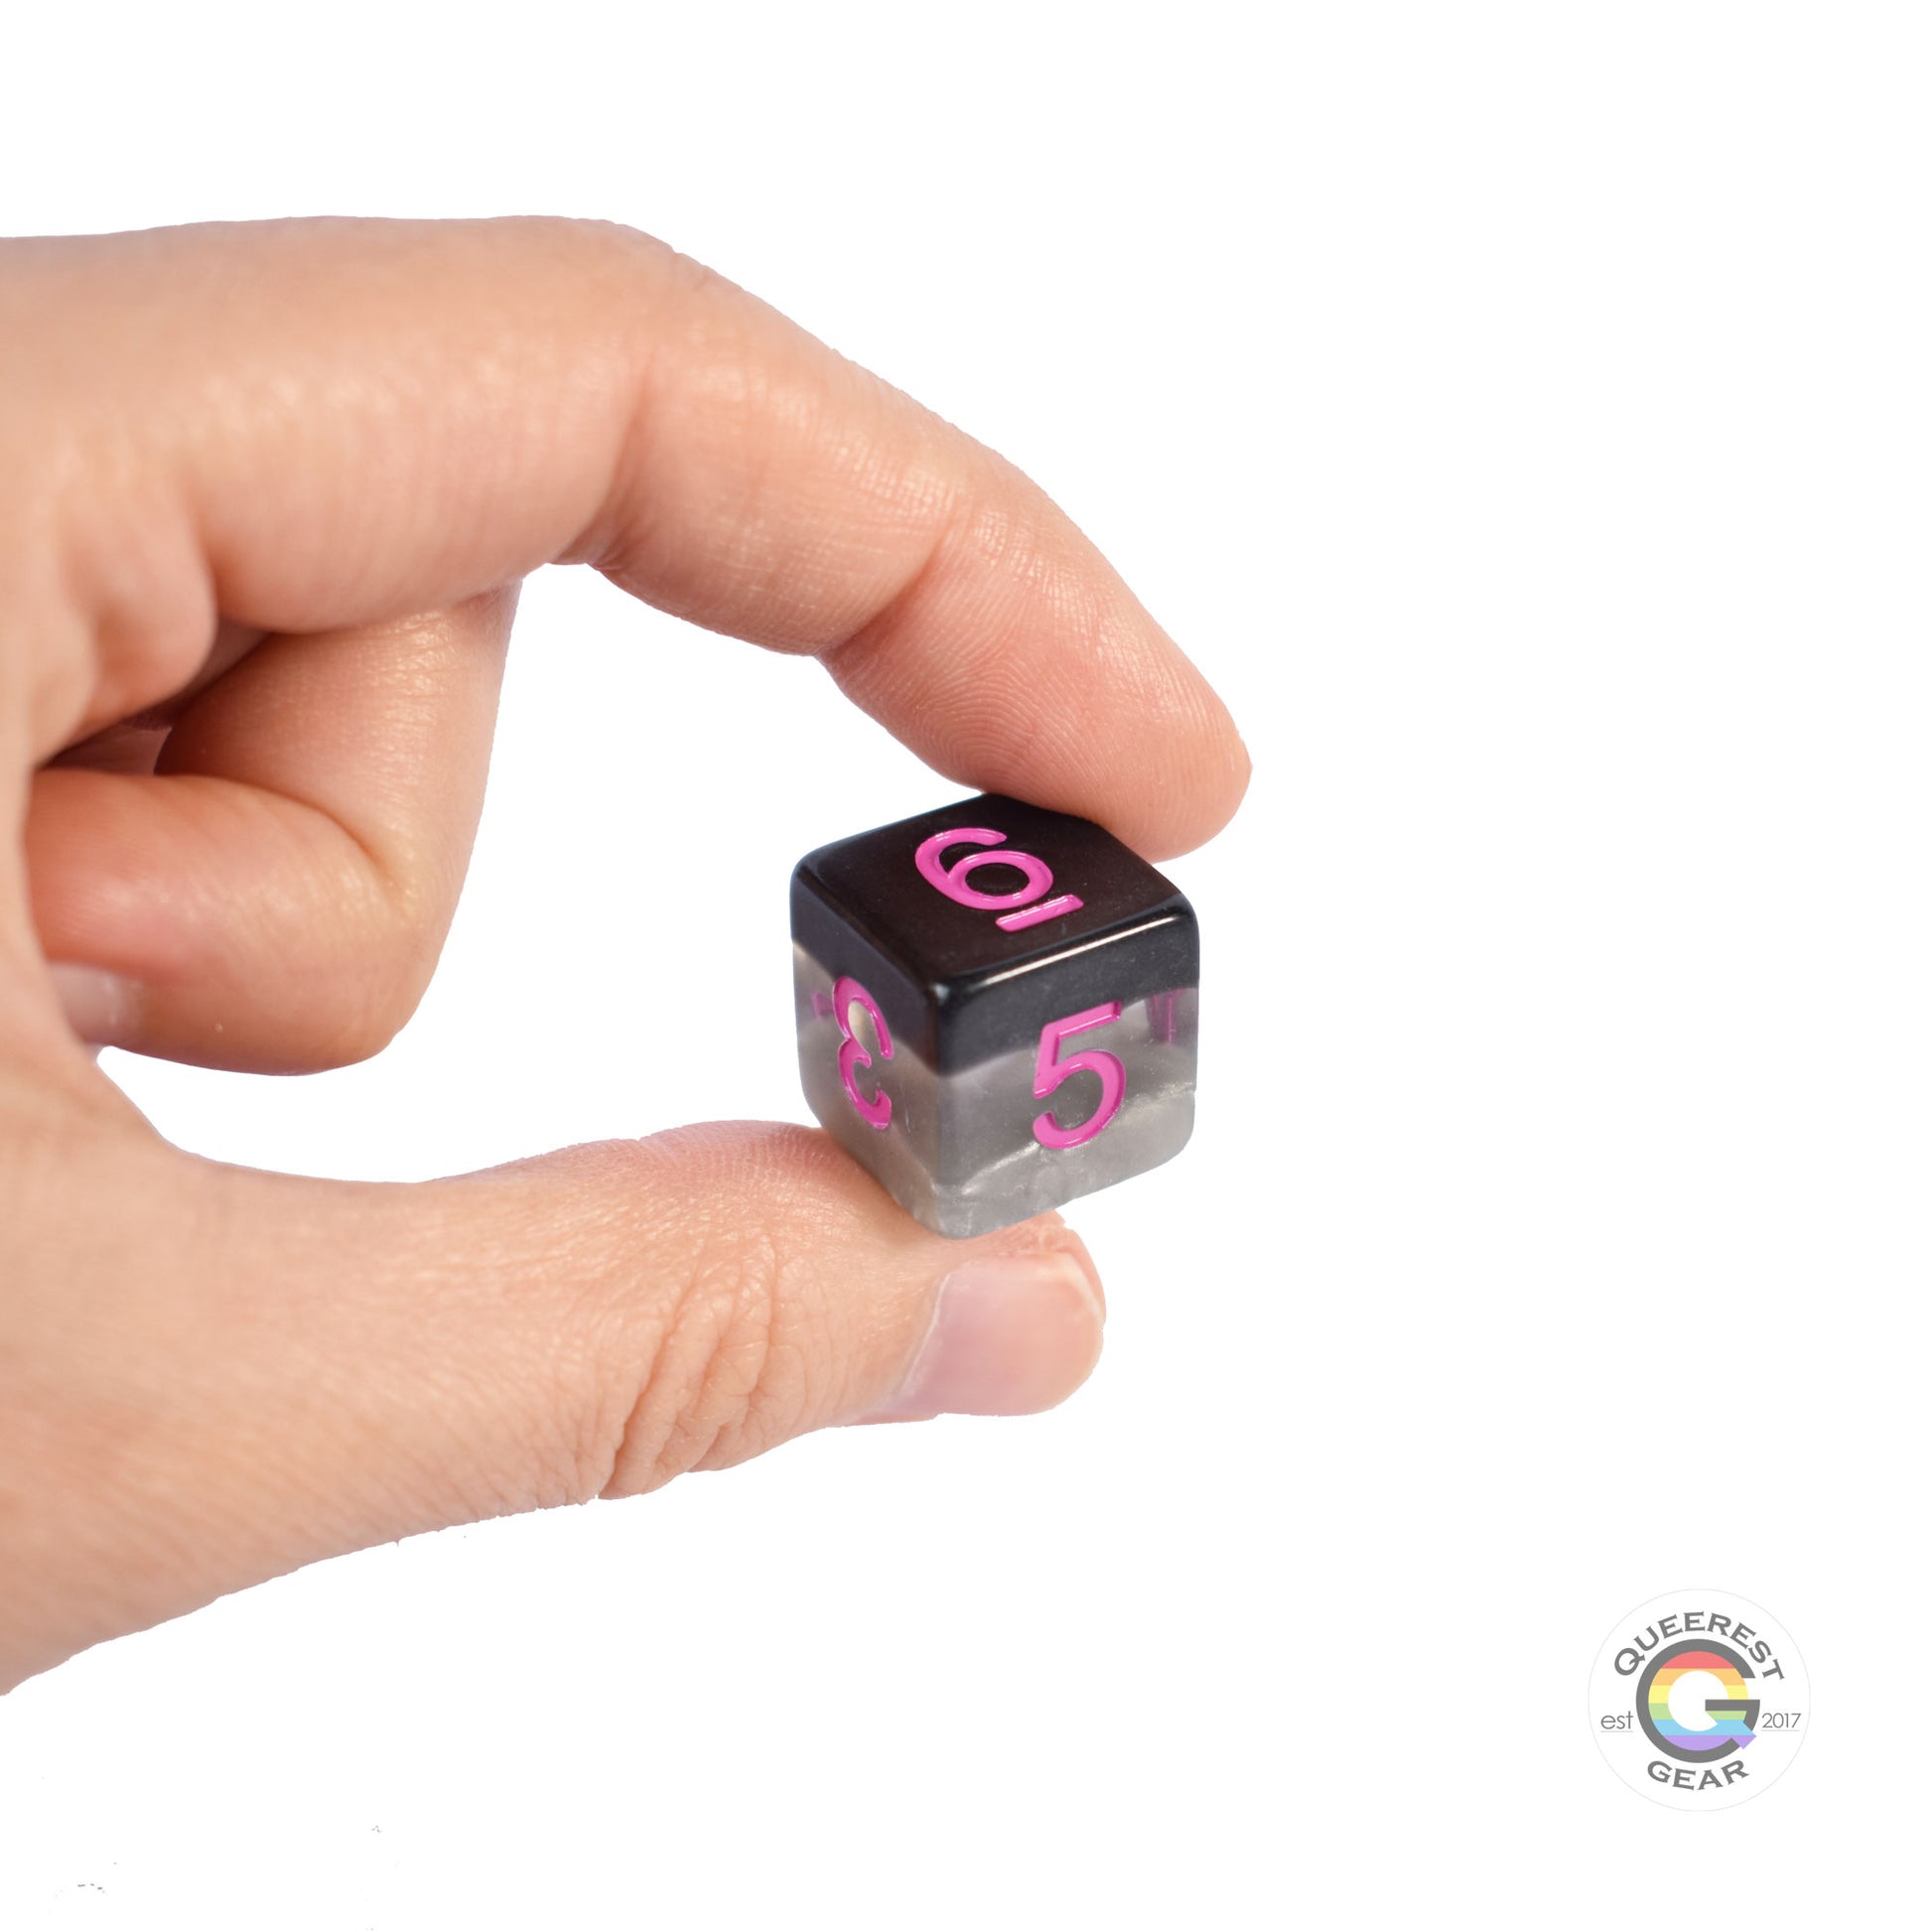 A hand holding up the demisexual d6 to show off the color and transparency